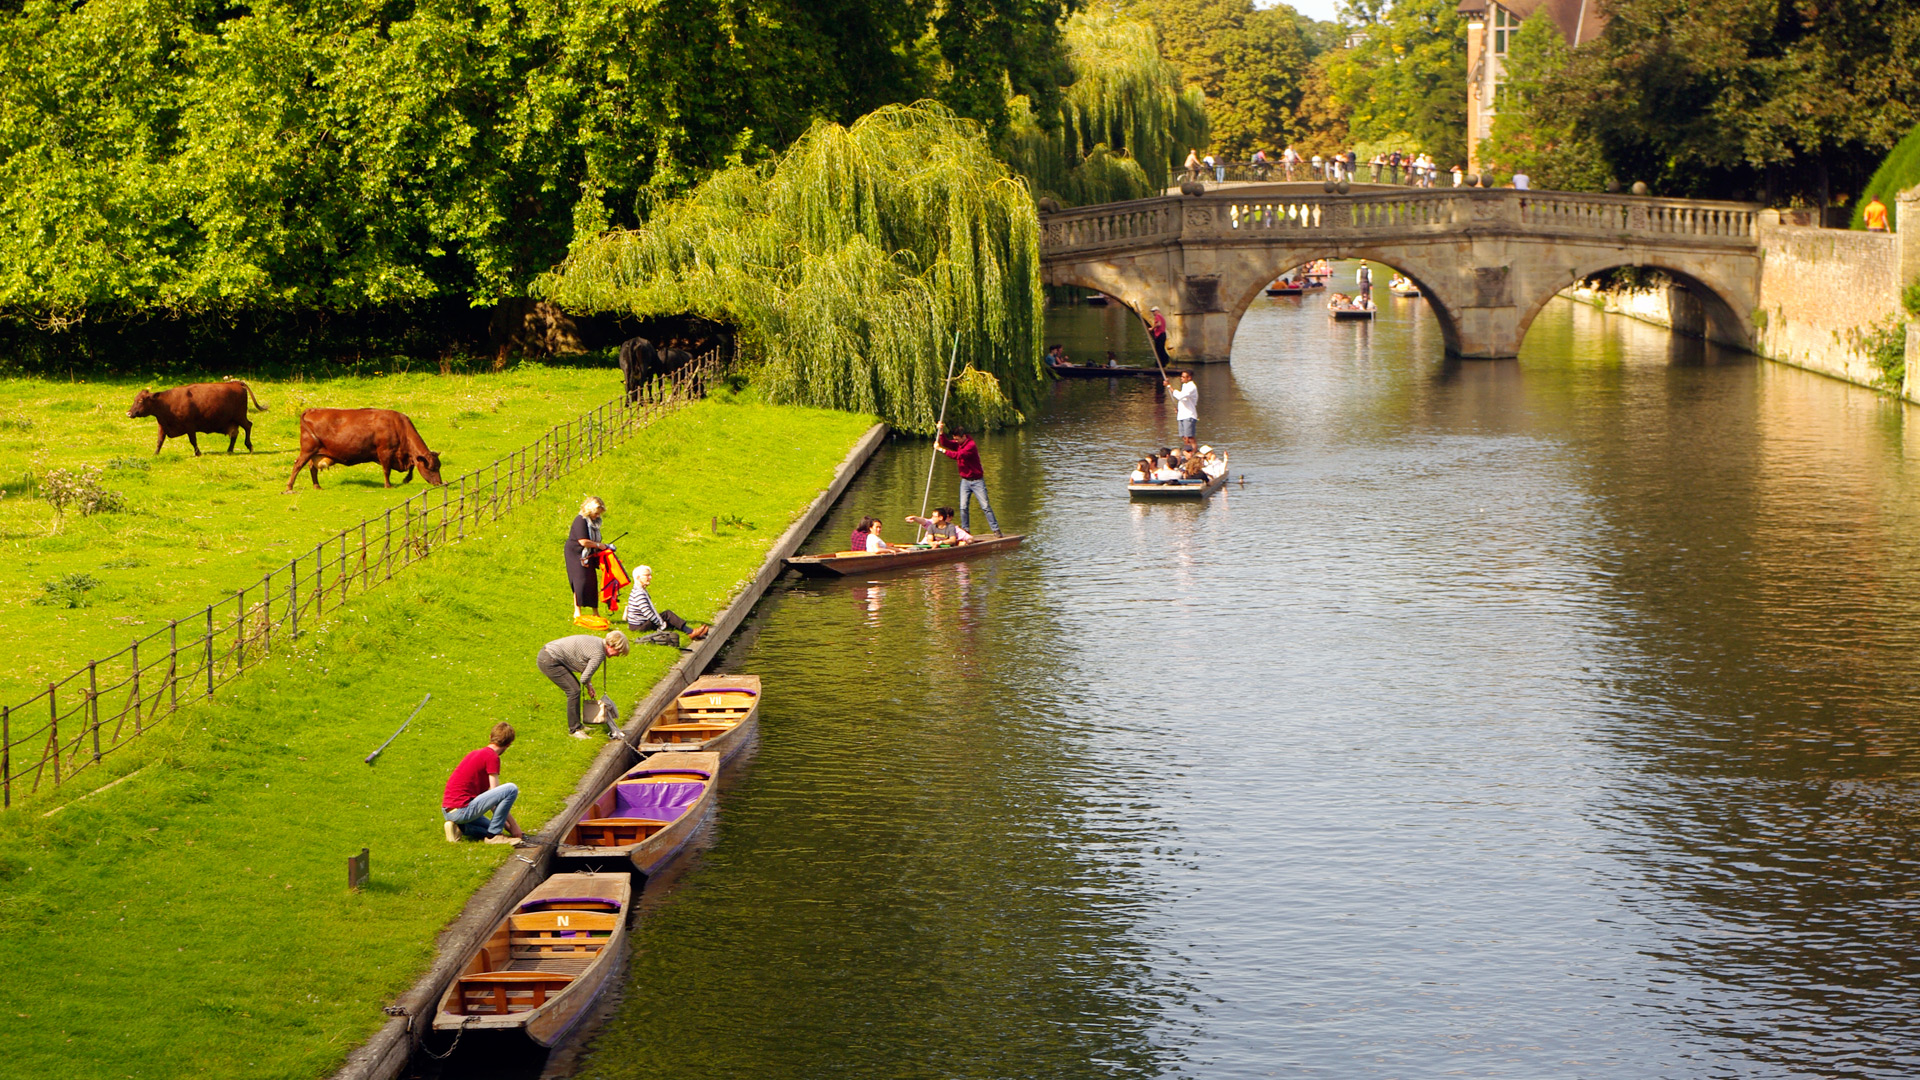 Punting on the River Cam